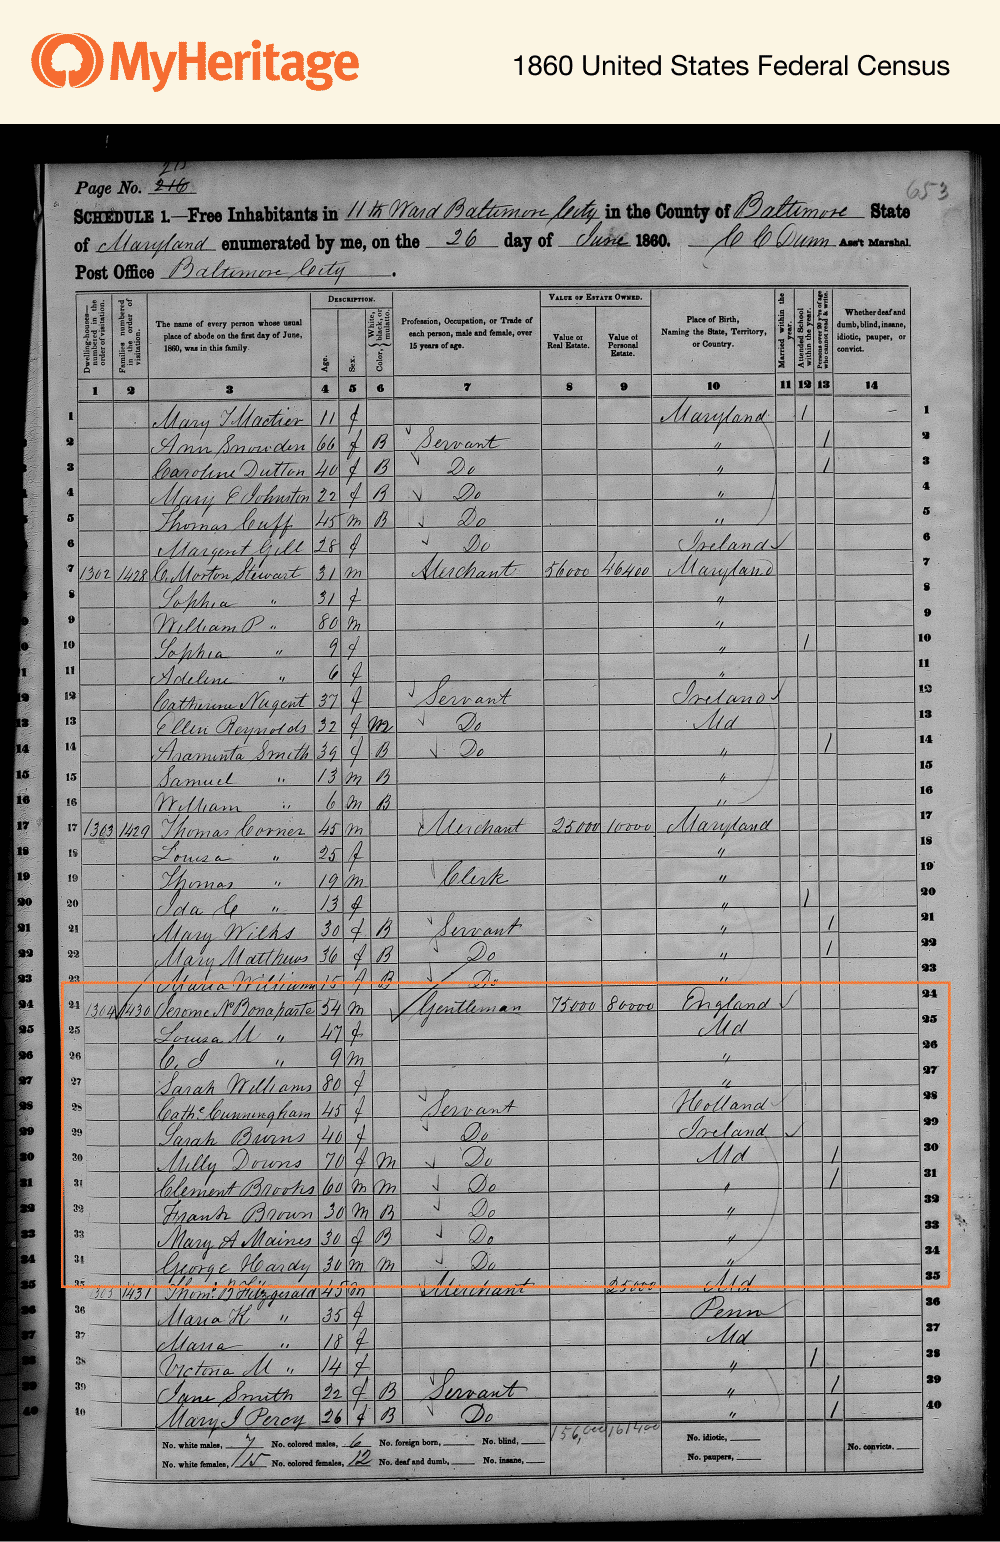 Jerome Napoleon Bonaparte appearing in the 1860 census with his household